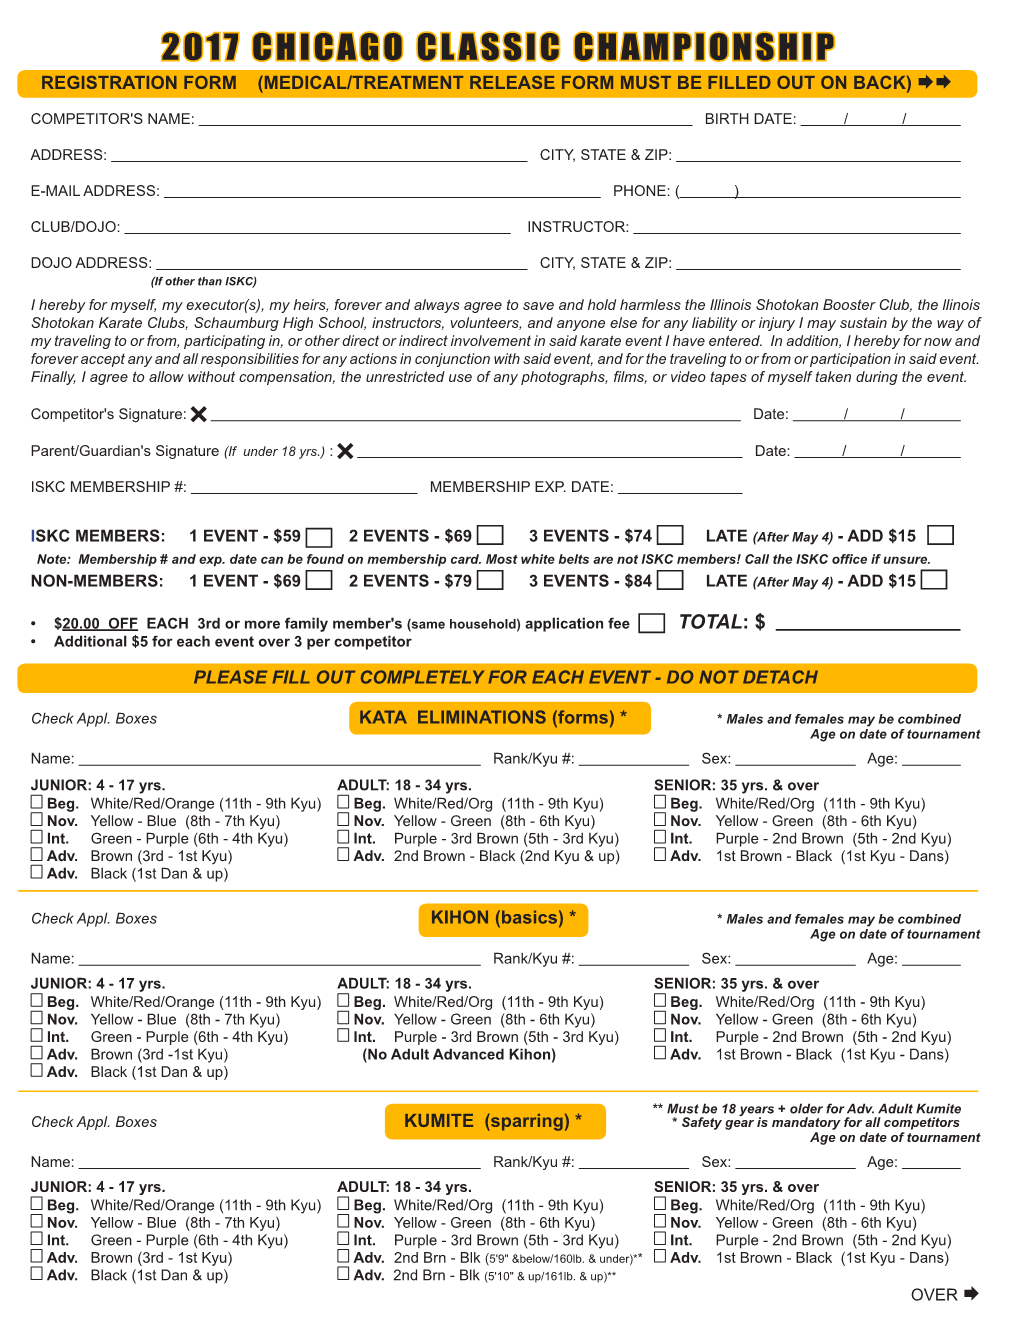 2017 Chicago Classic Championship Registration Form (Medical/Treatment Release Form Must Be Filled out on Back) 